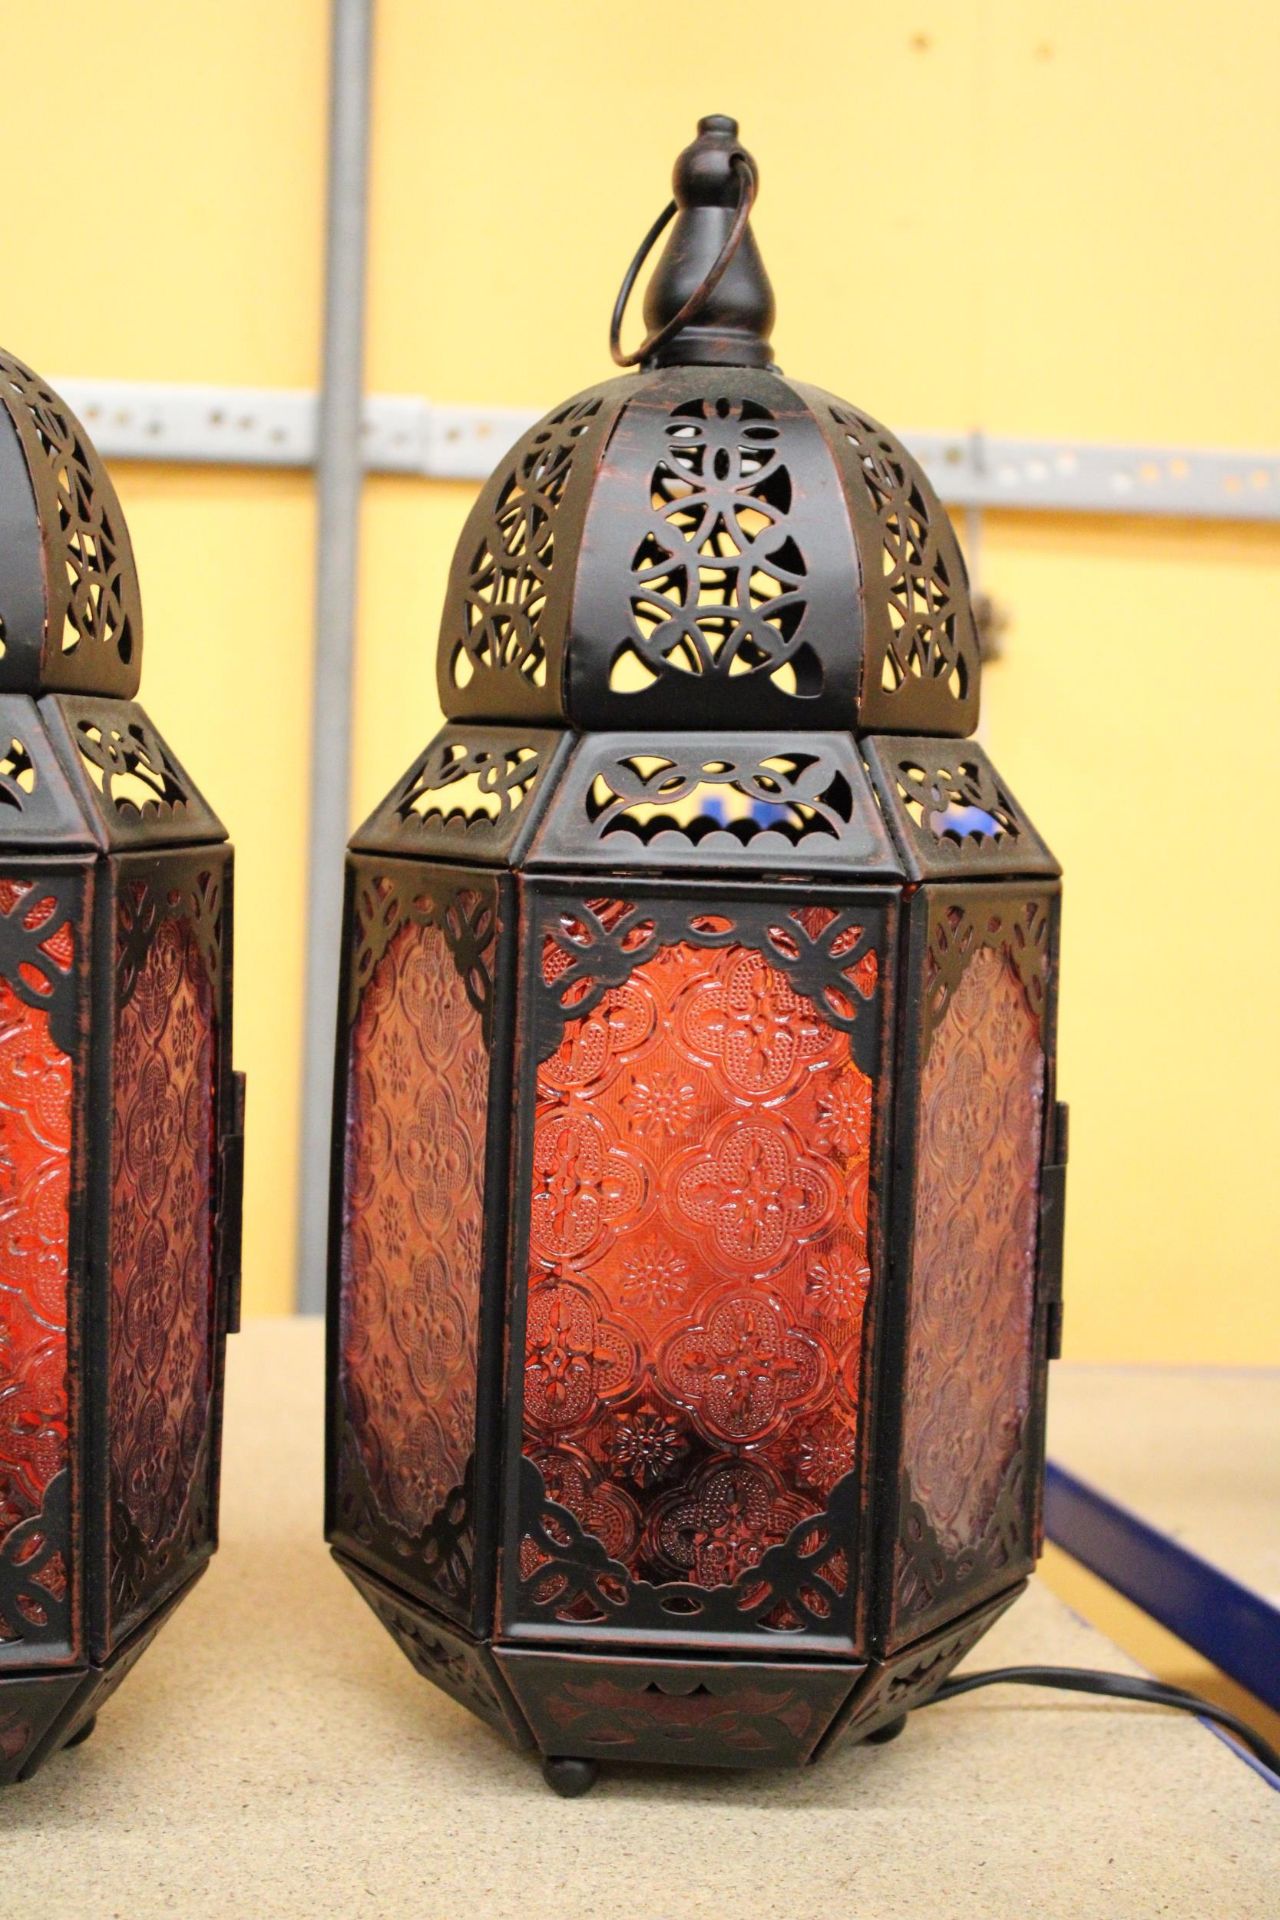 A PAIR OF MOROCCAN STYLE TABLE LAMPS - Image 3 of 4